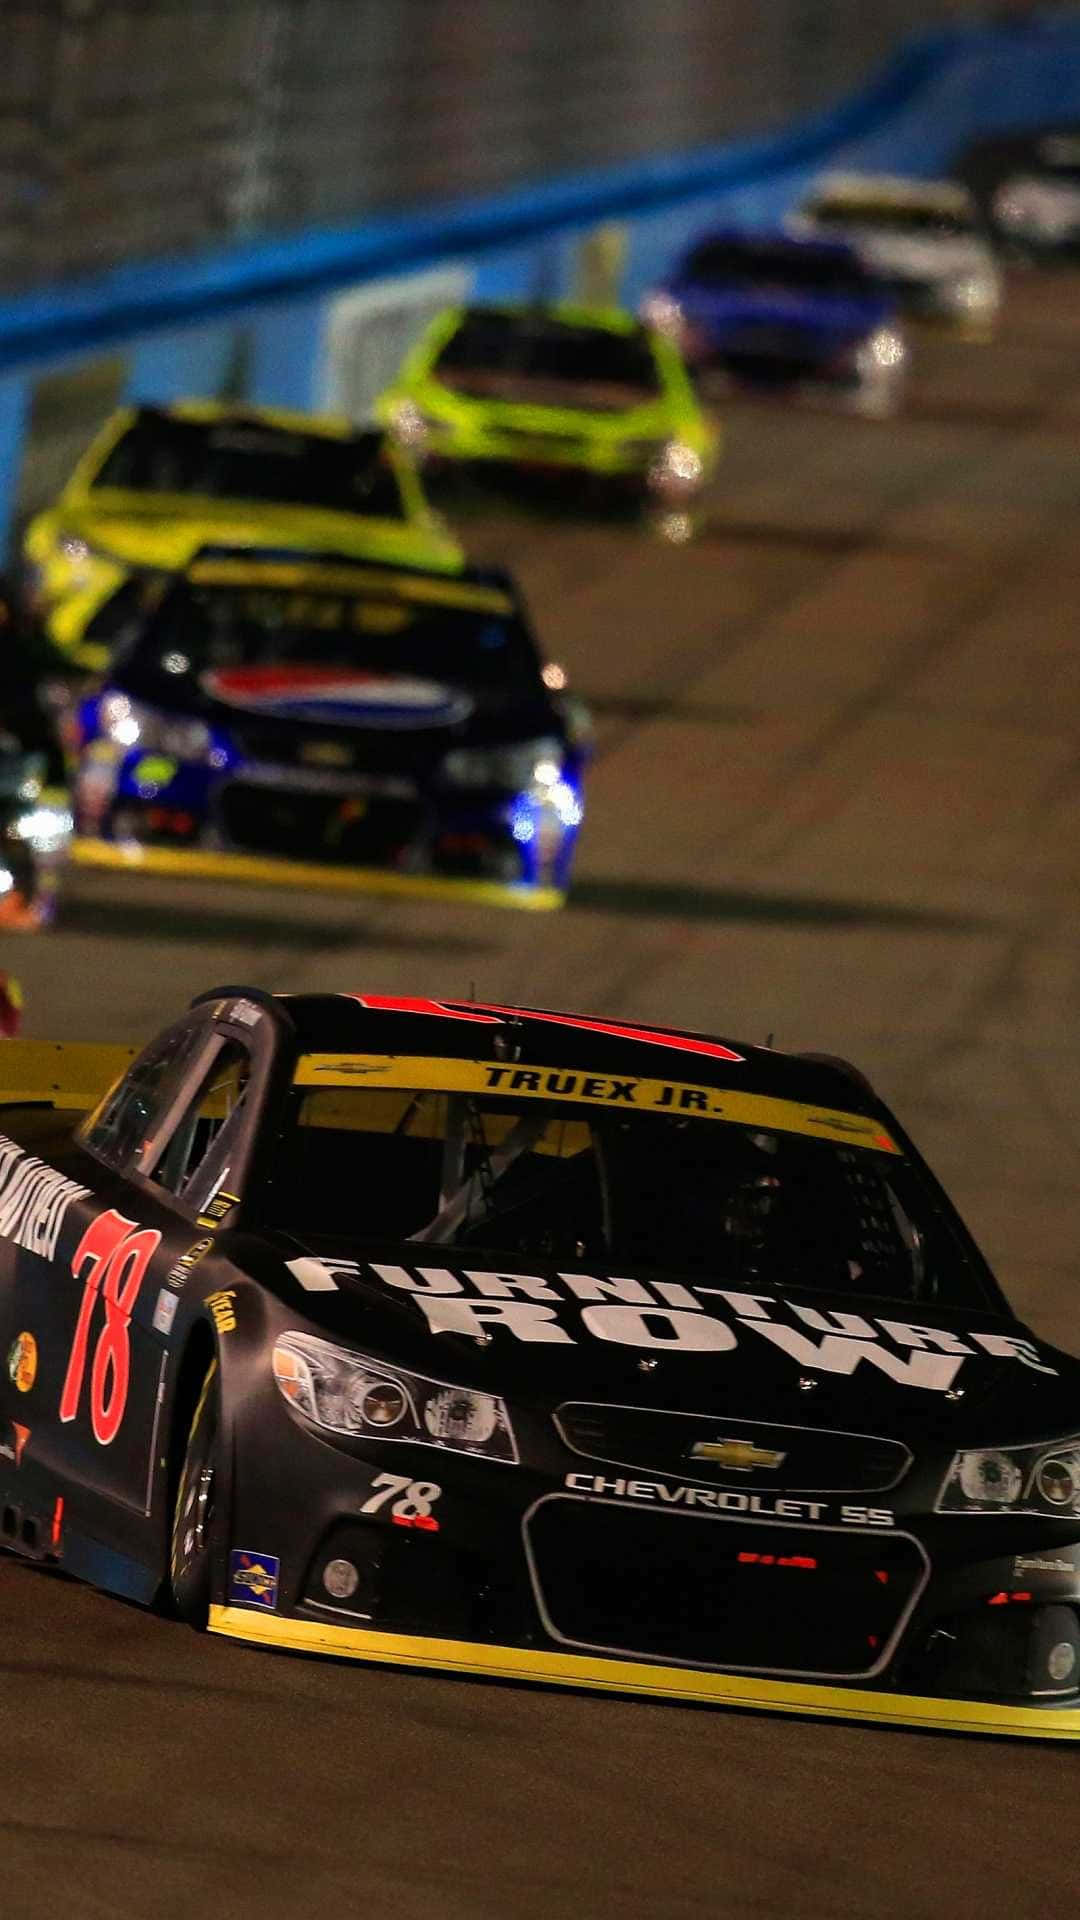 Get Ready for Race Day with the Nascar Edition iPhone Wallpaper